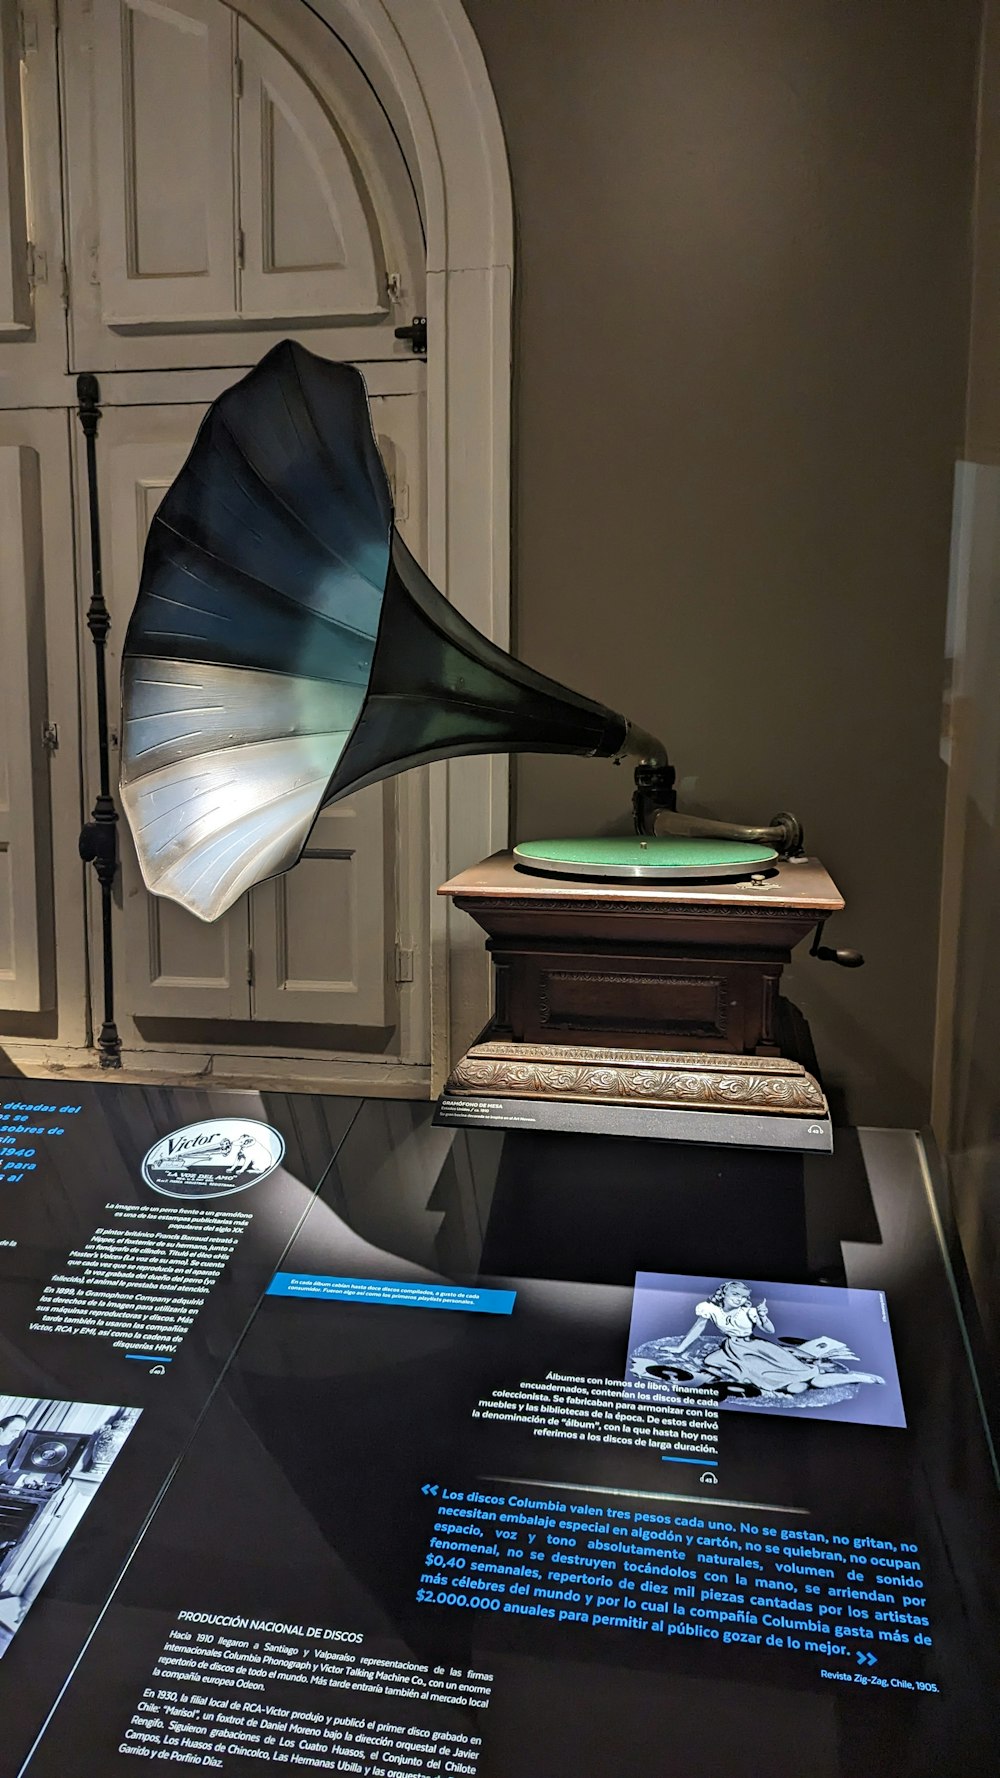 an old record player on display in a museum